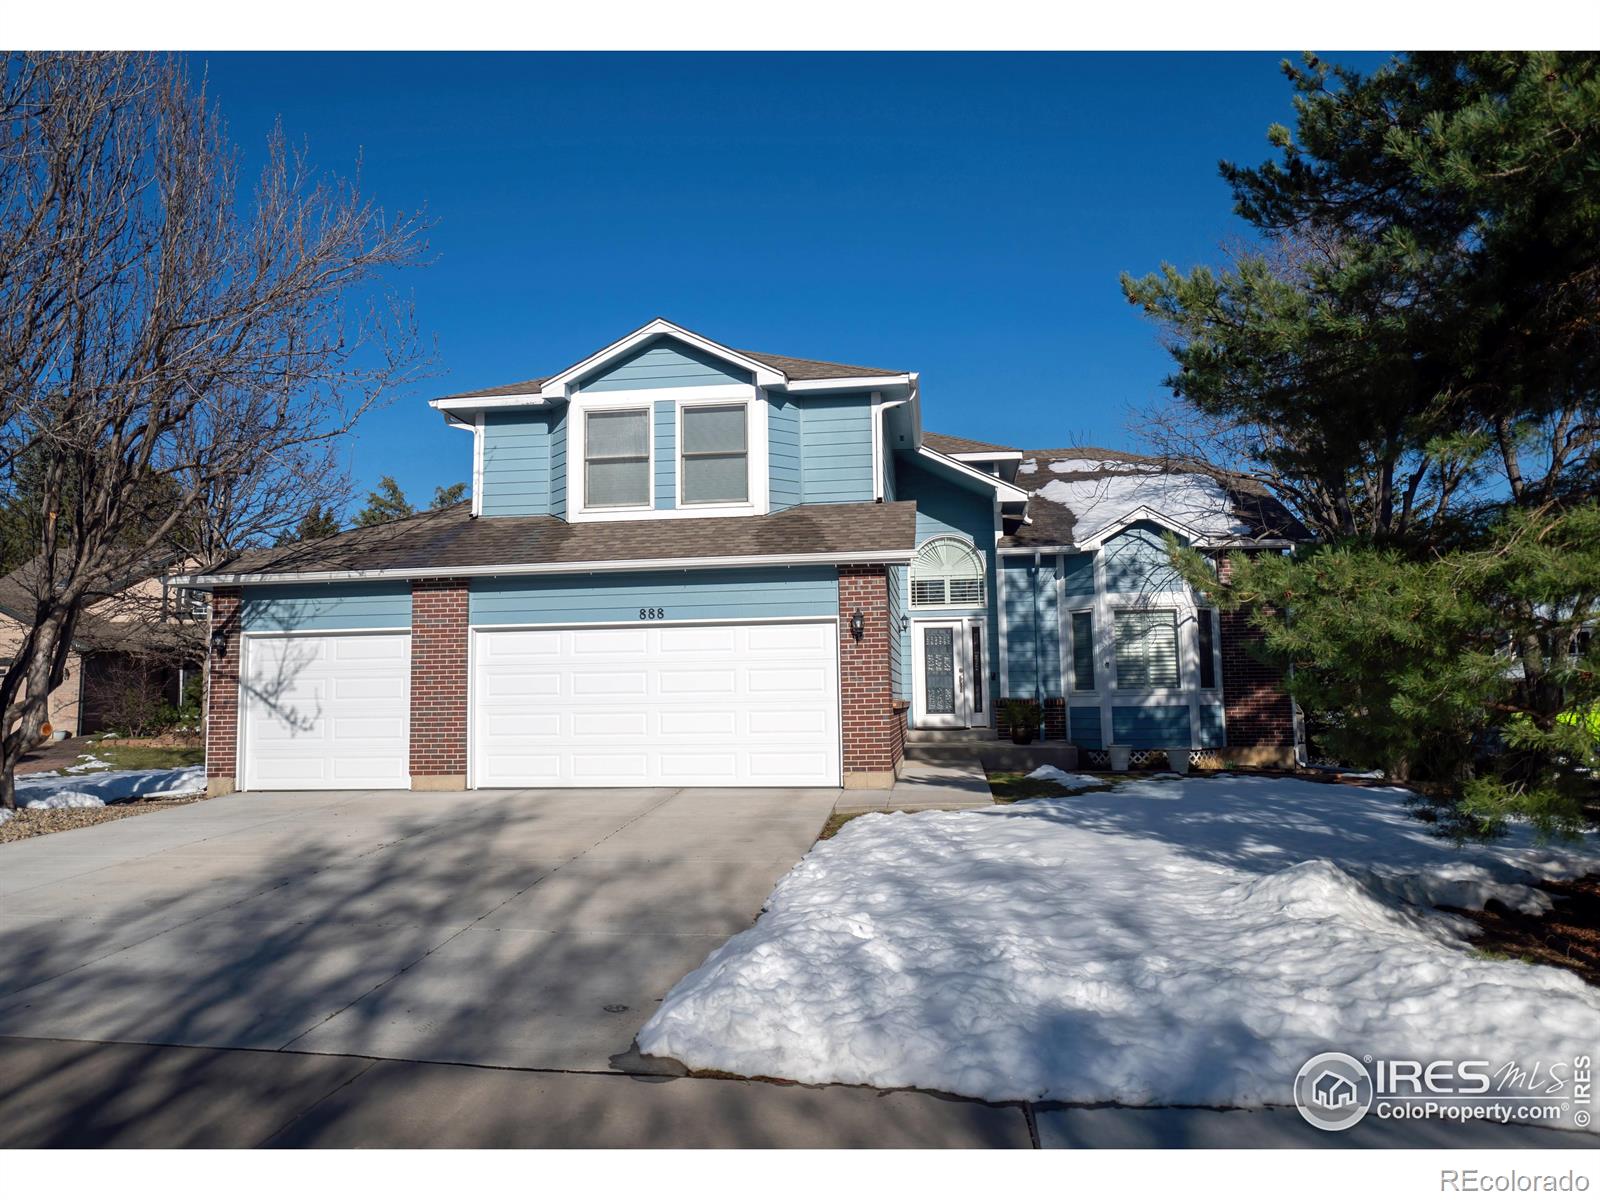 CMA Image for 888 s palisade court,Louisville, Colorado